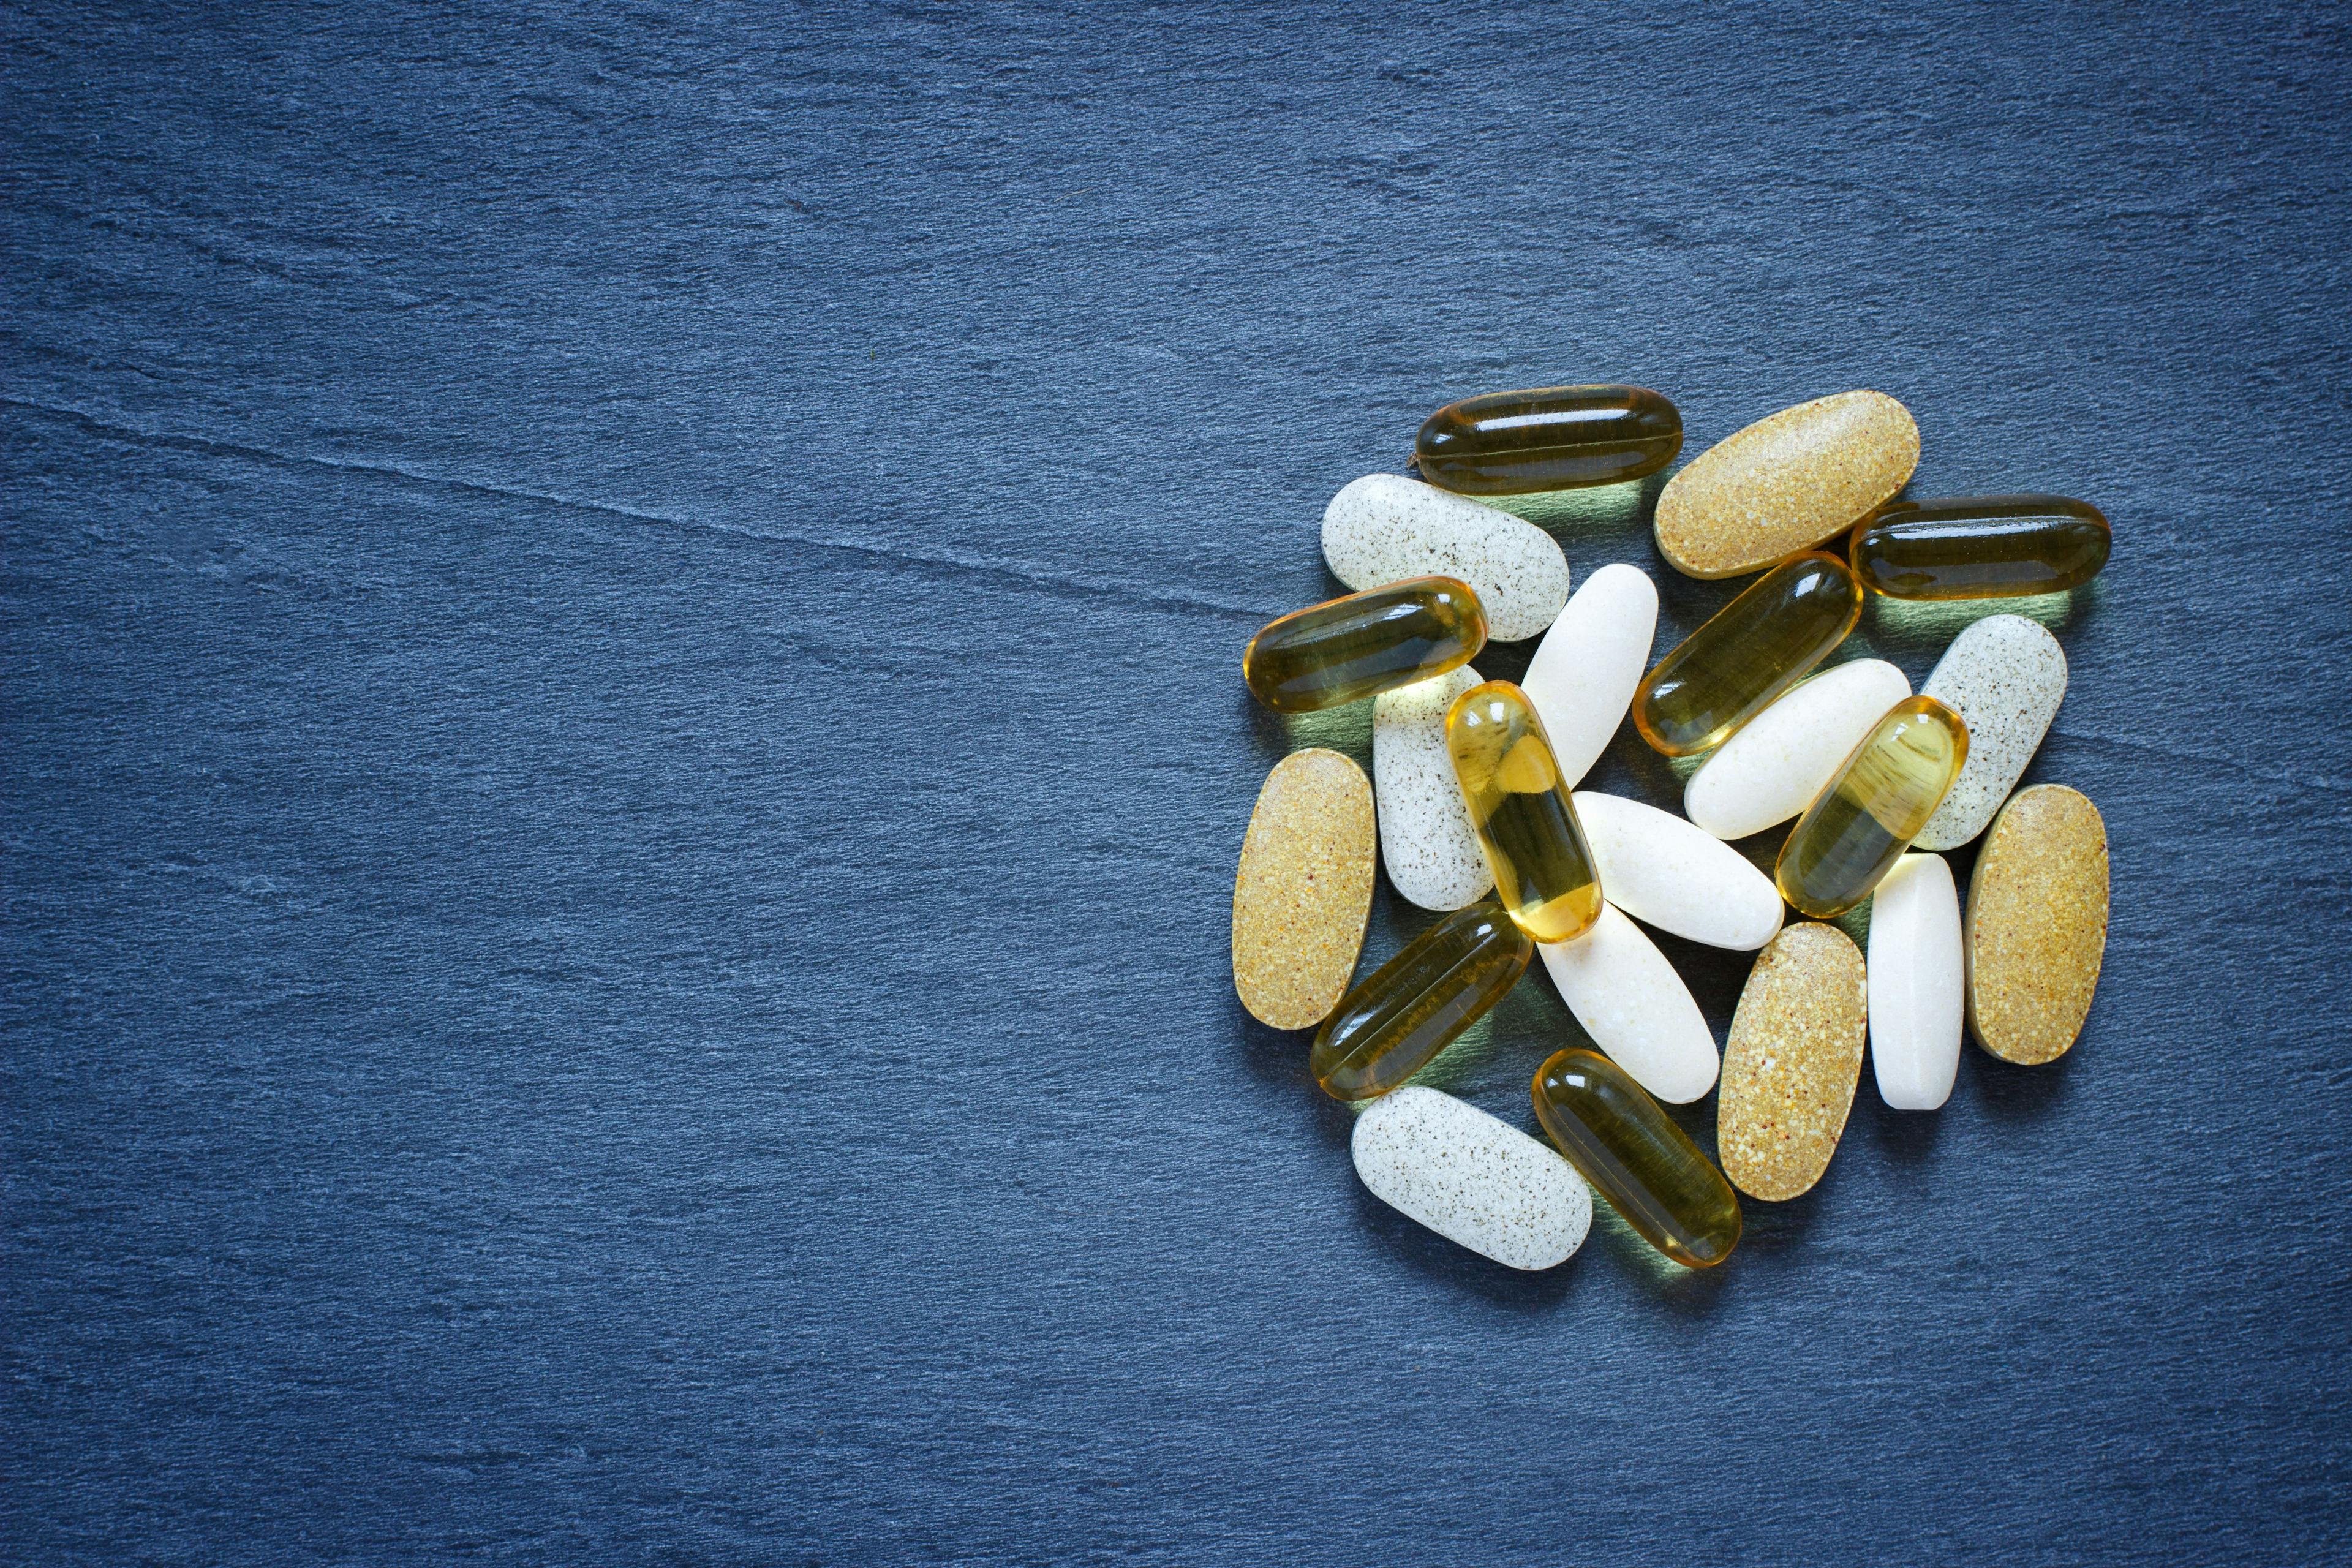 Expert Discusses What Pharmacists Should Know About Herbal Supplements for Dementia